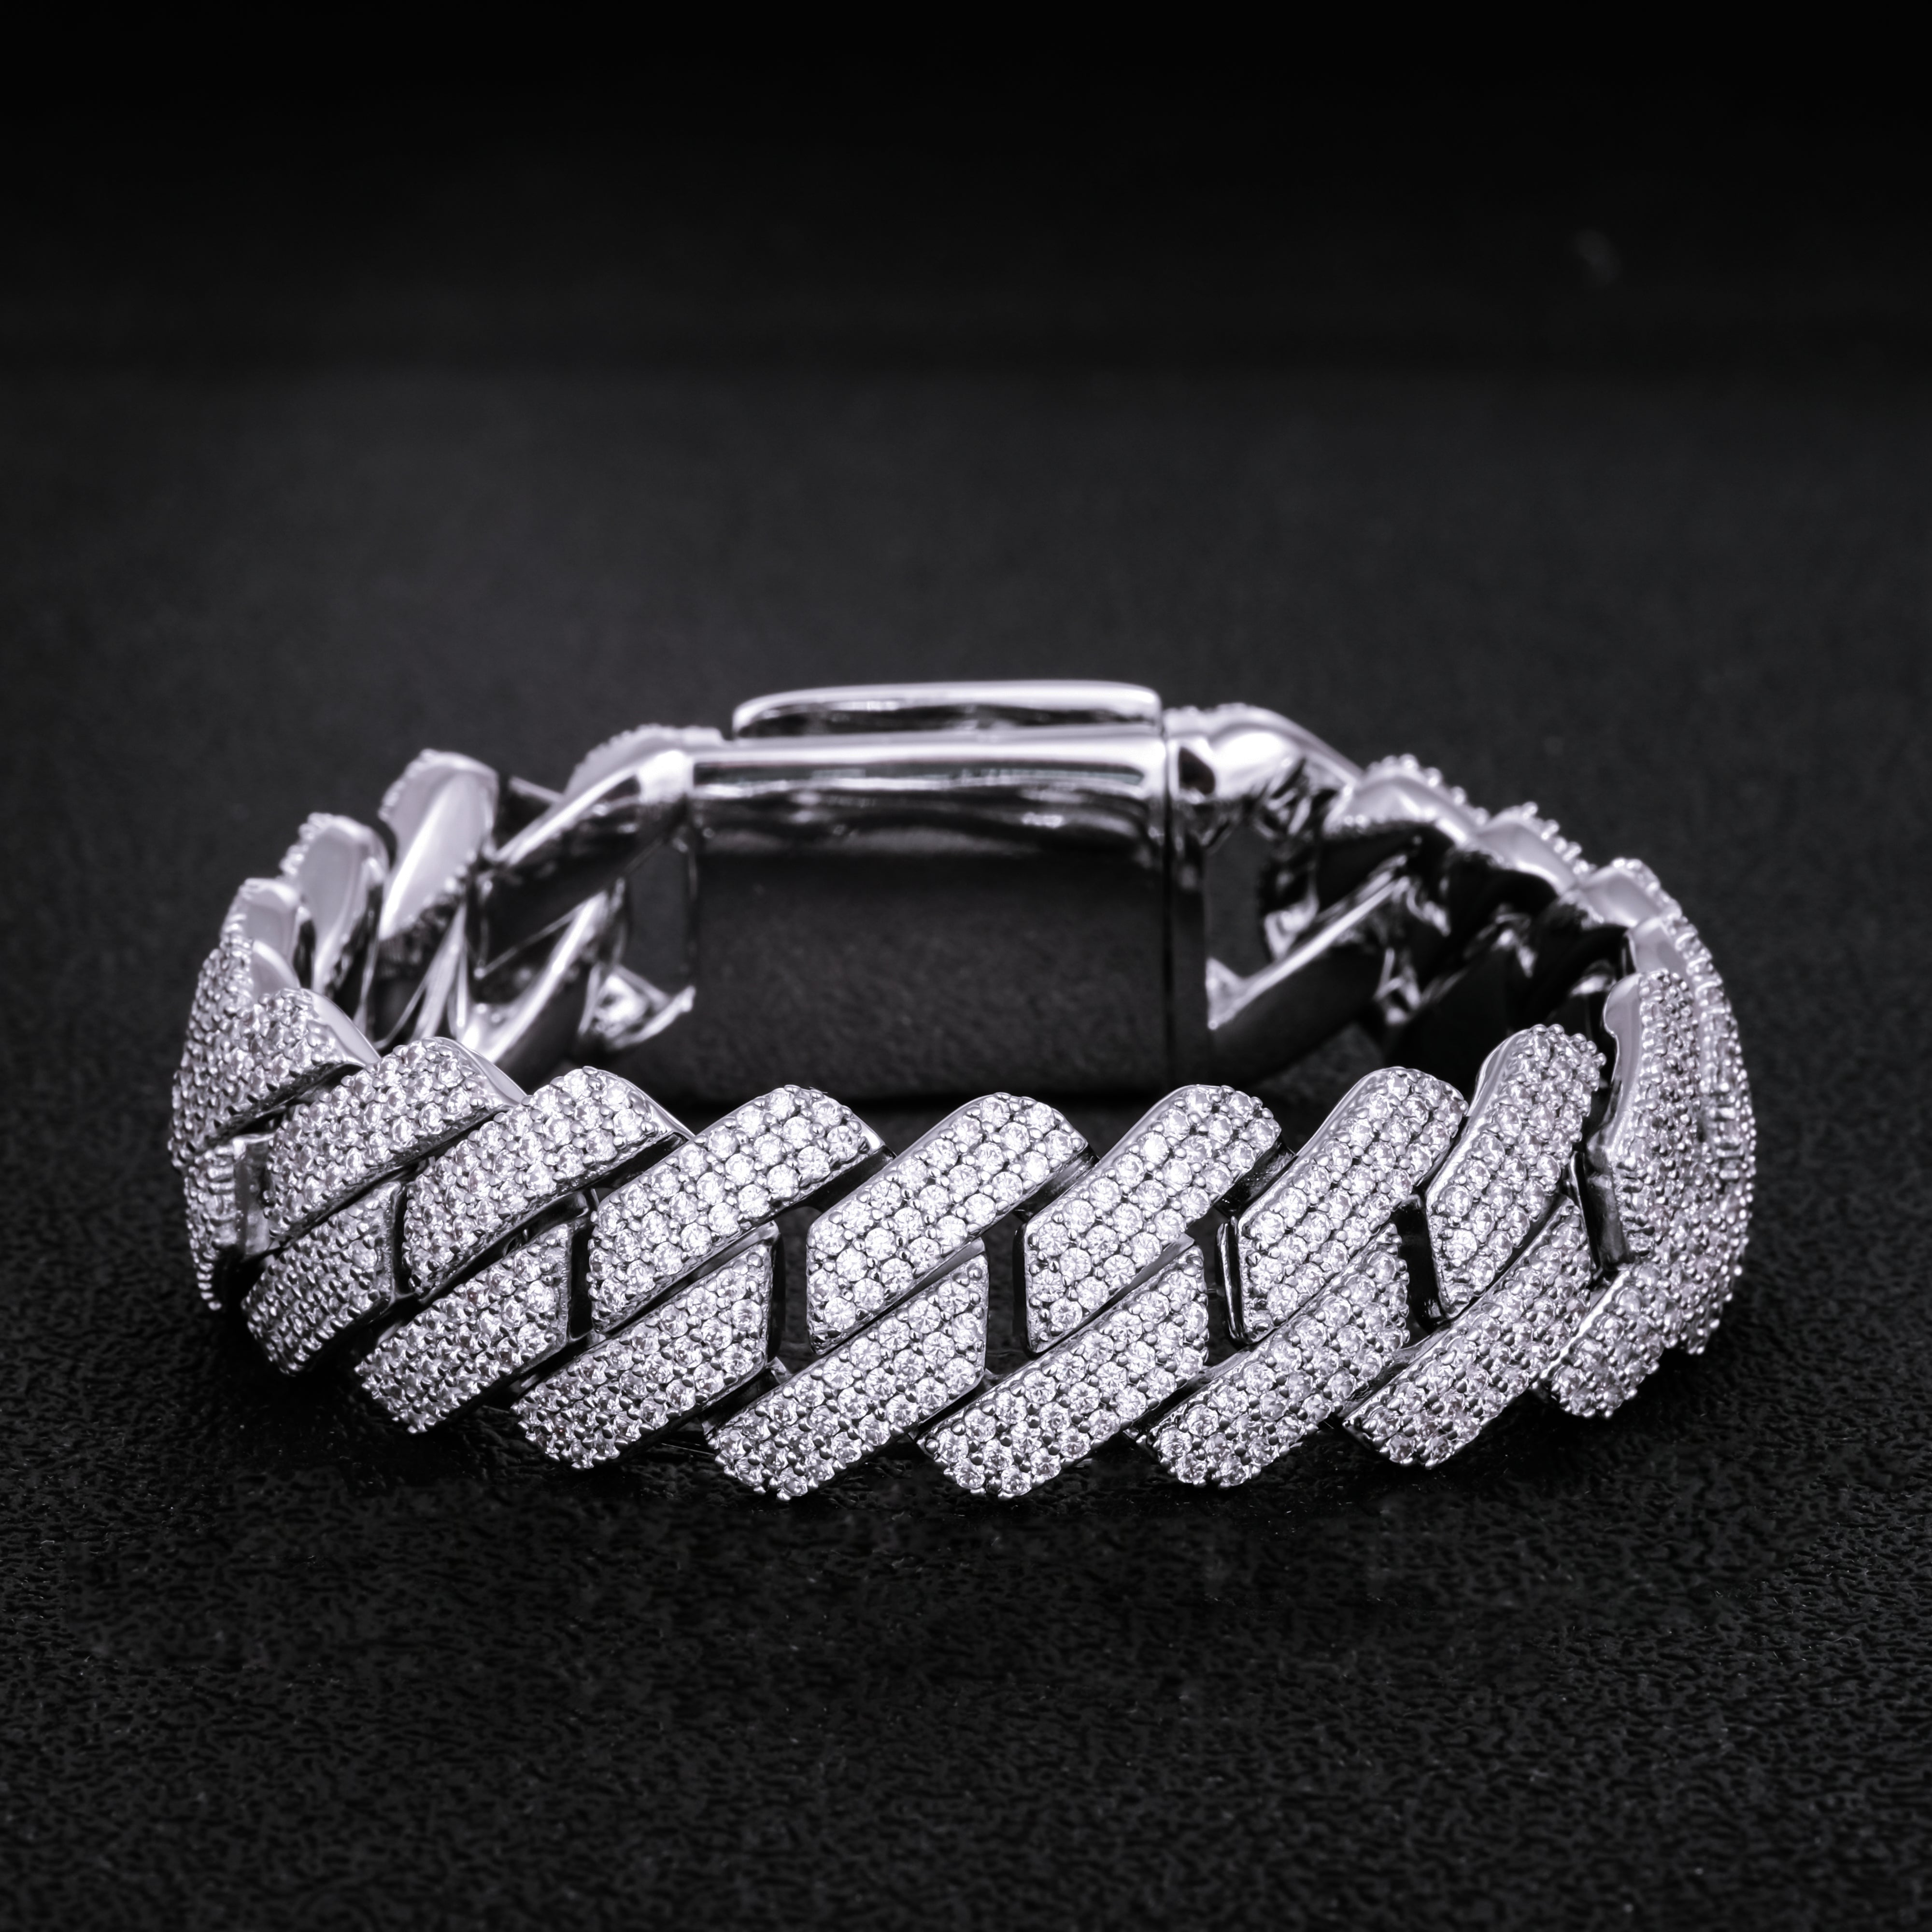 (19MM) 3 ROWS DIAMOND PRONG LINK CUBAN BRACELET IN WHITE GOLD/GOLD